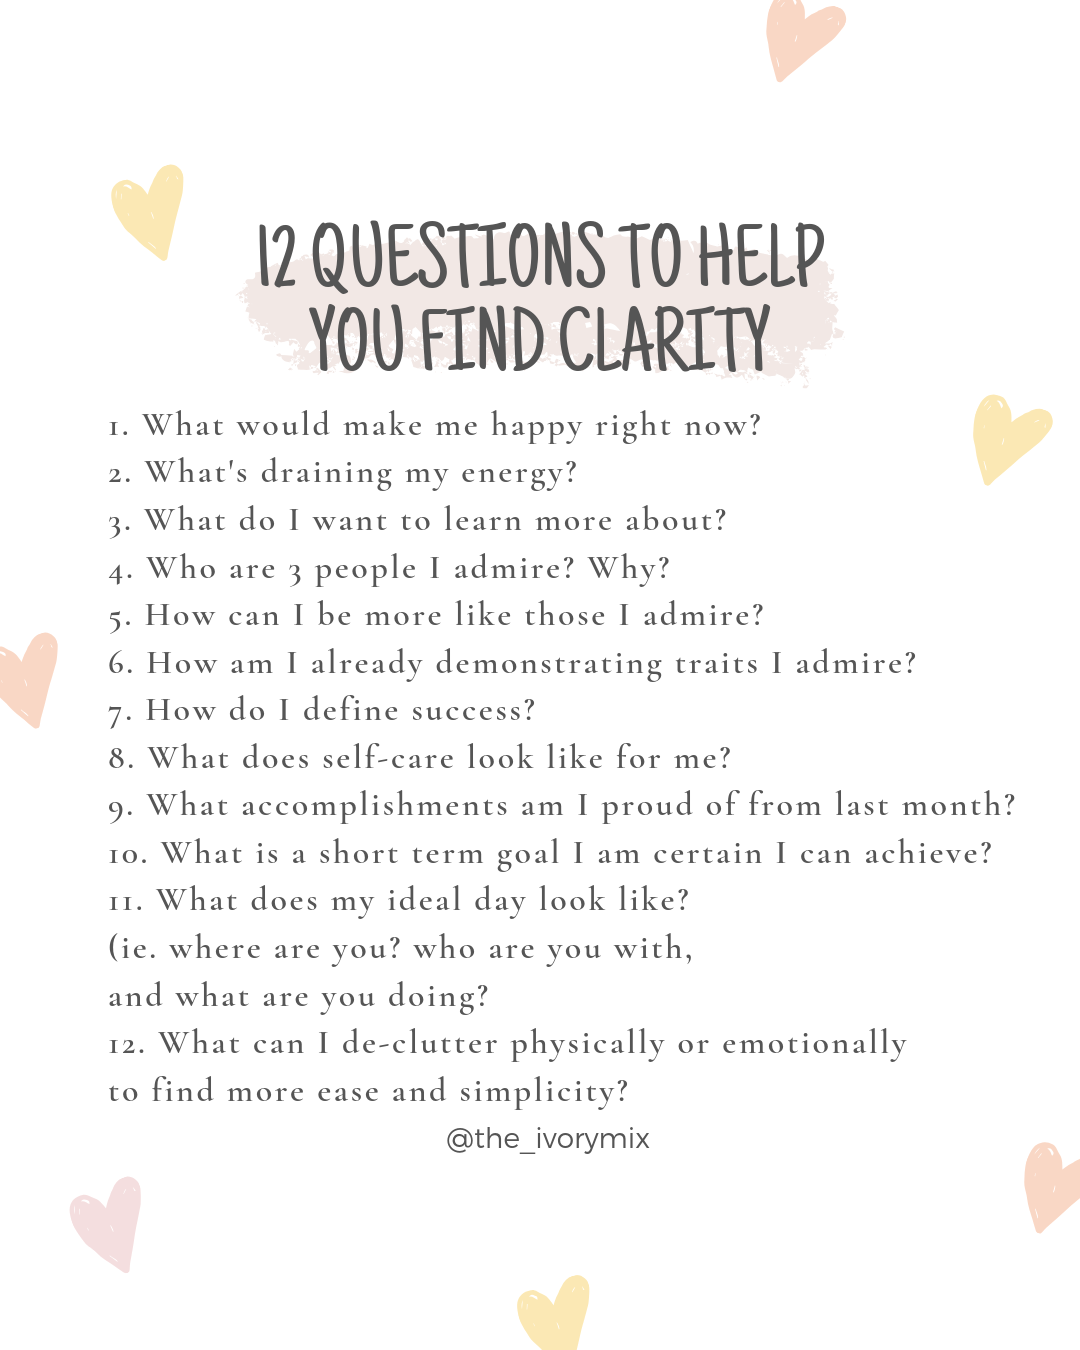 12 questions to help you find clarity